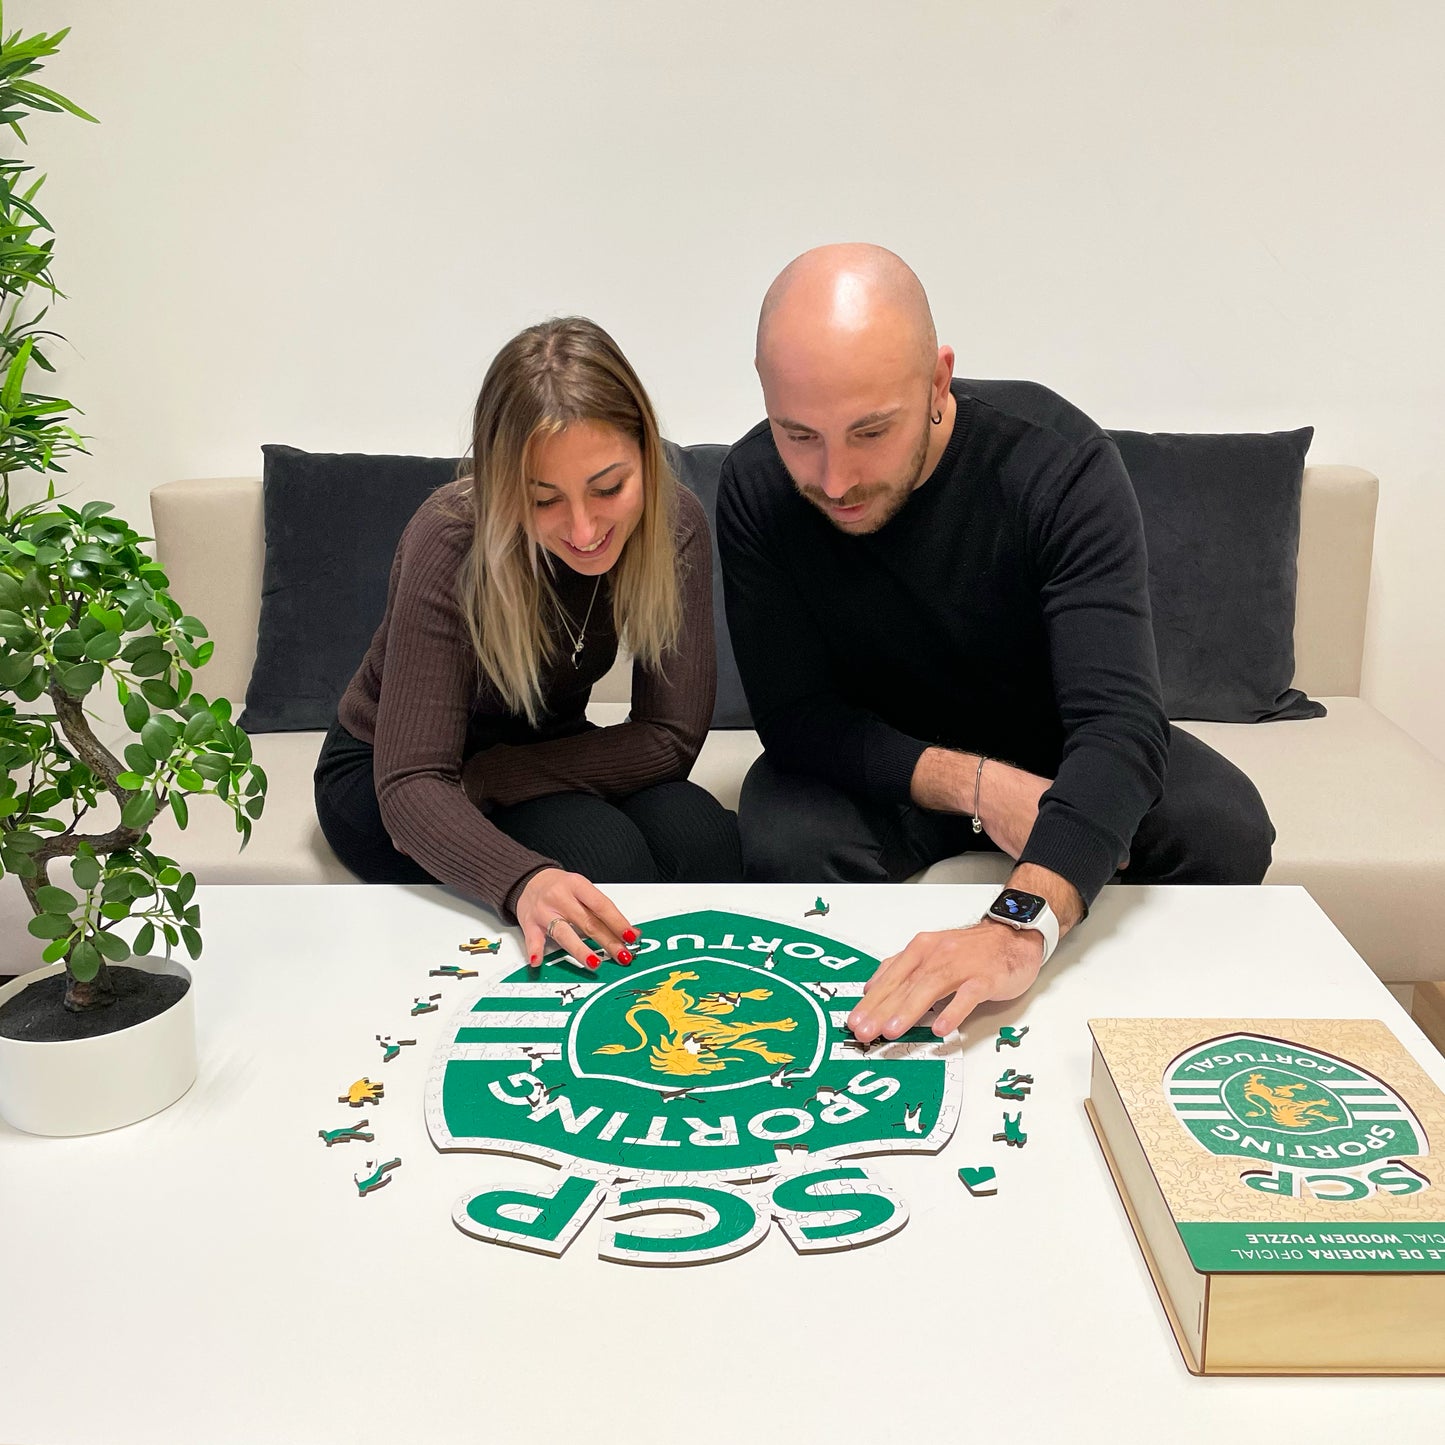 Sporting CP® Logo - Wooden Puzzle